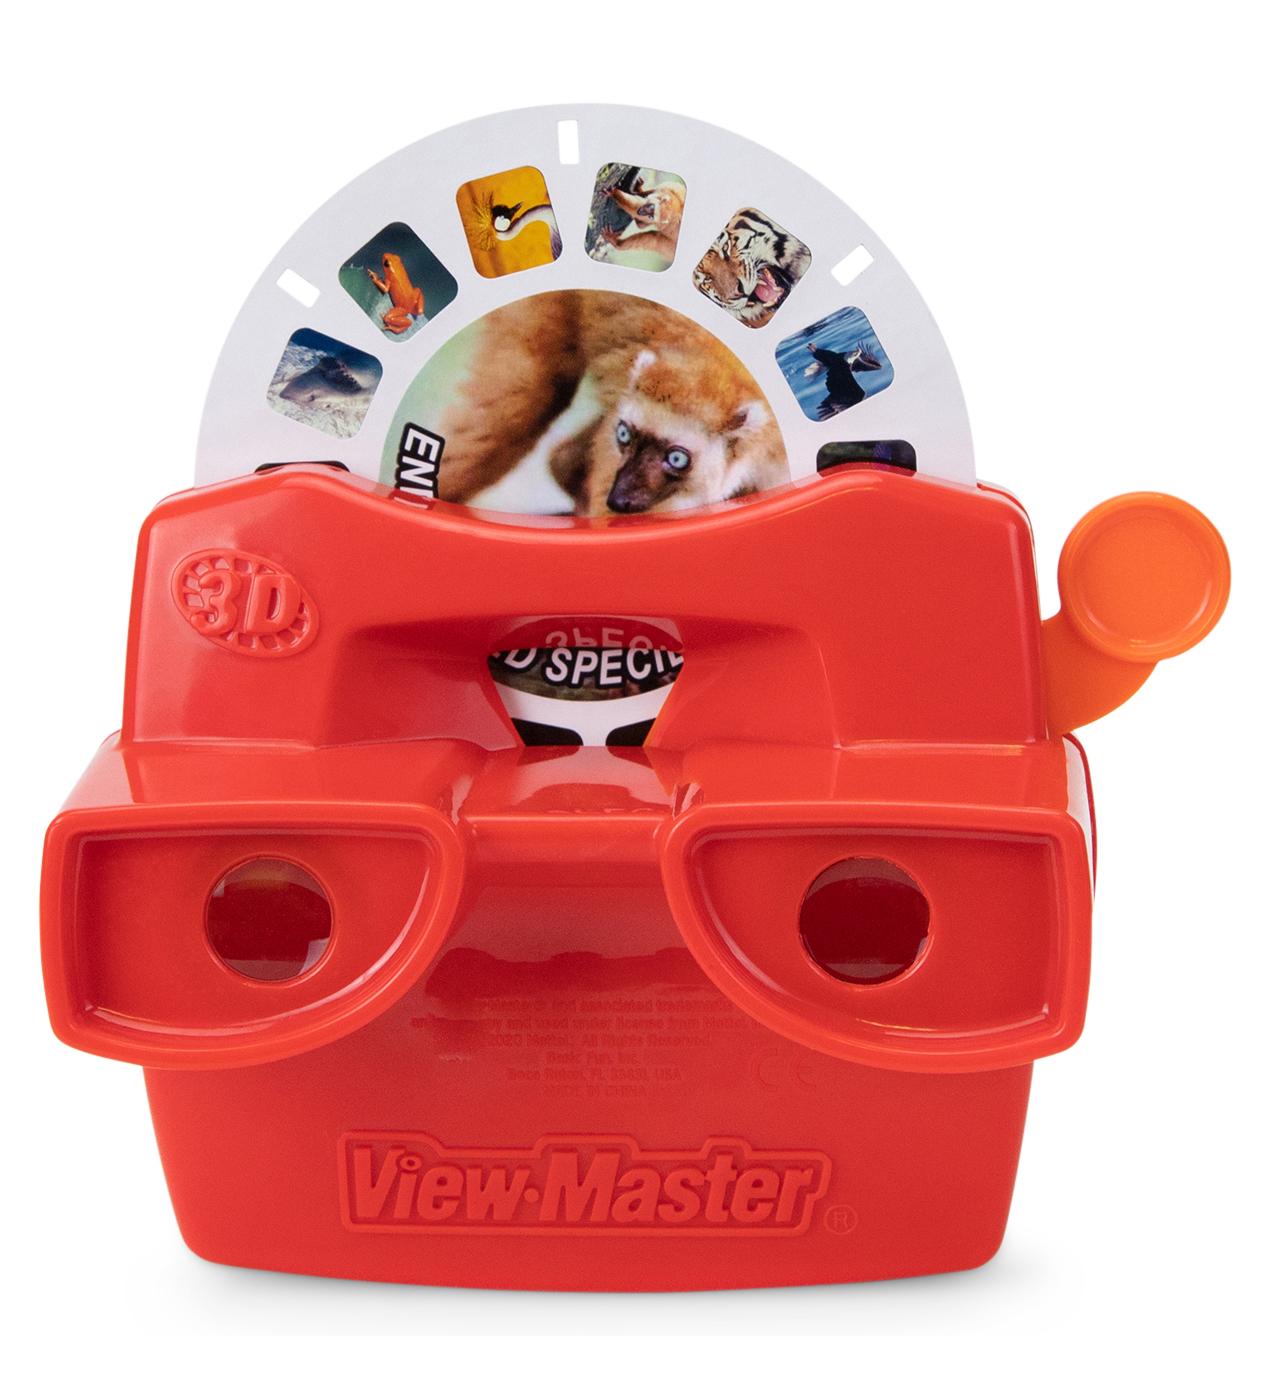 View Master 3D Classic Viewer – Discovery Endangered Species - Shop  Playsets at H-E-B